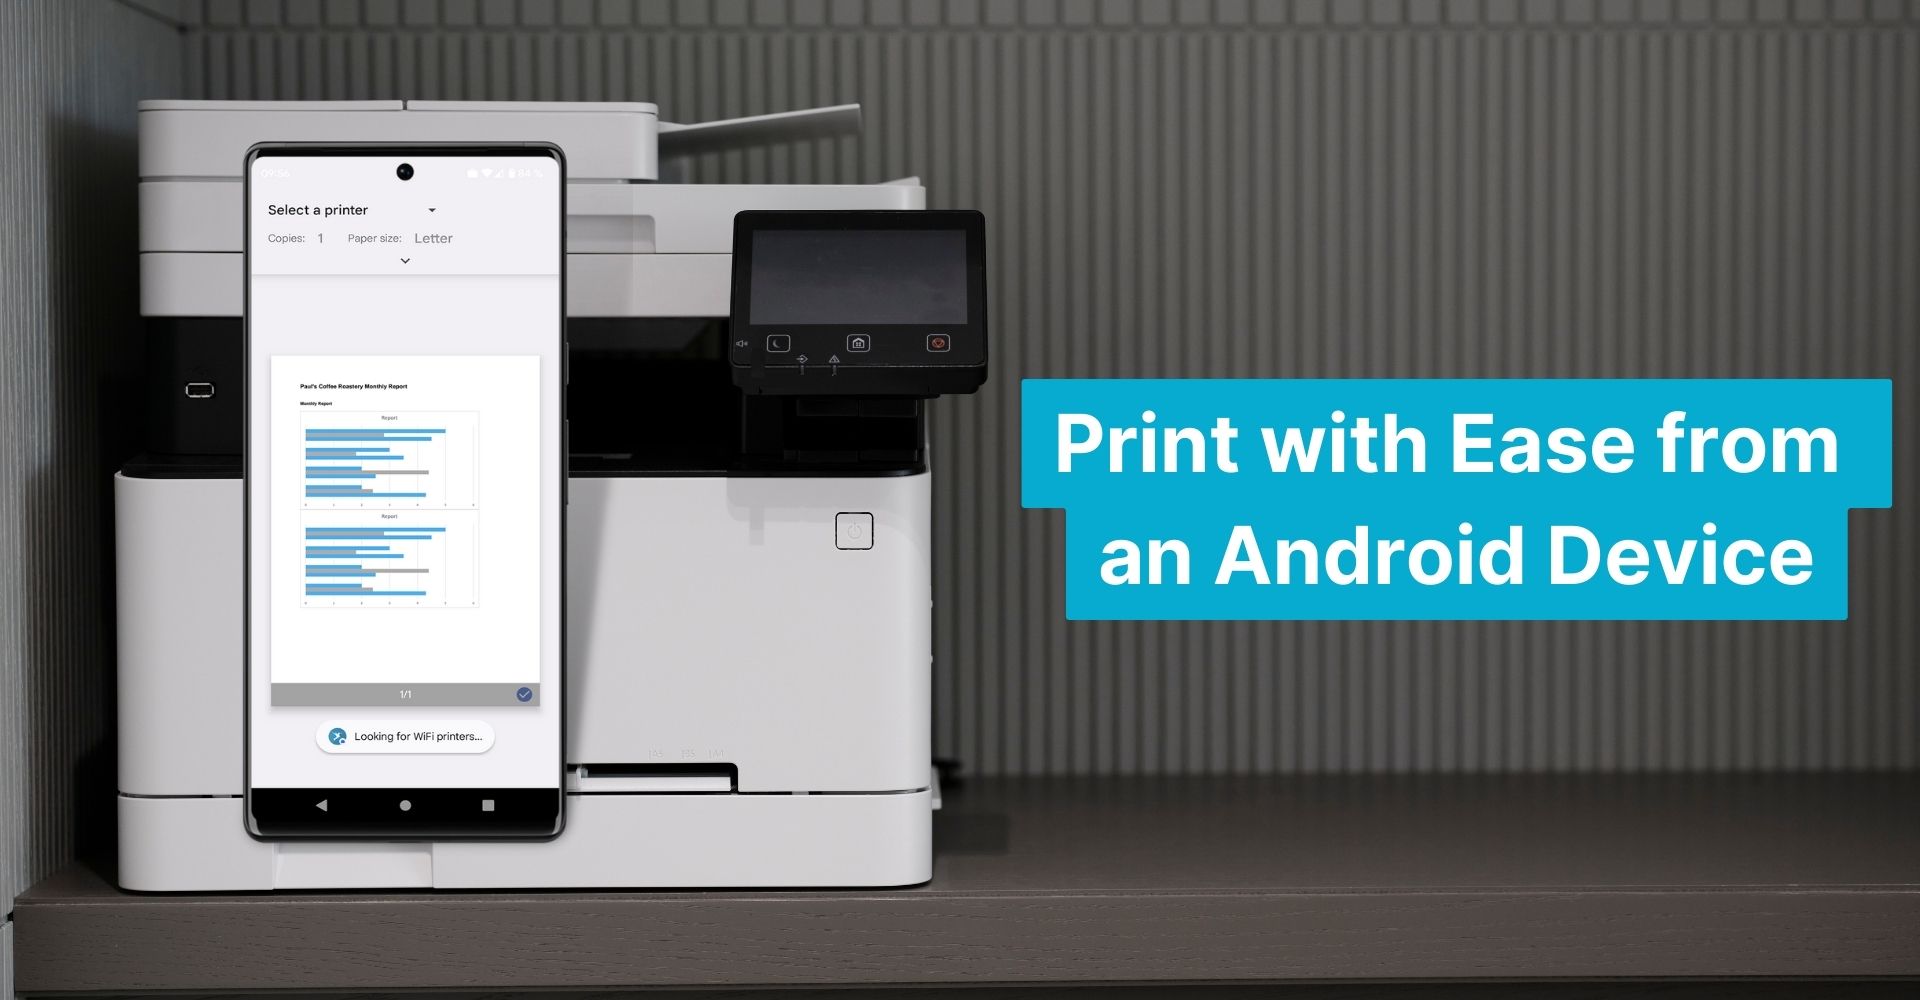 How to Print from an Android Smartphone or Tablet 

How to Print a Document from an Android